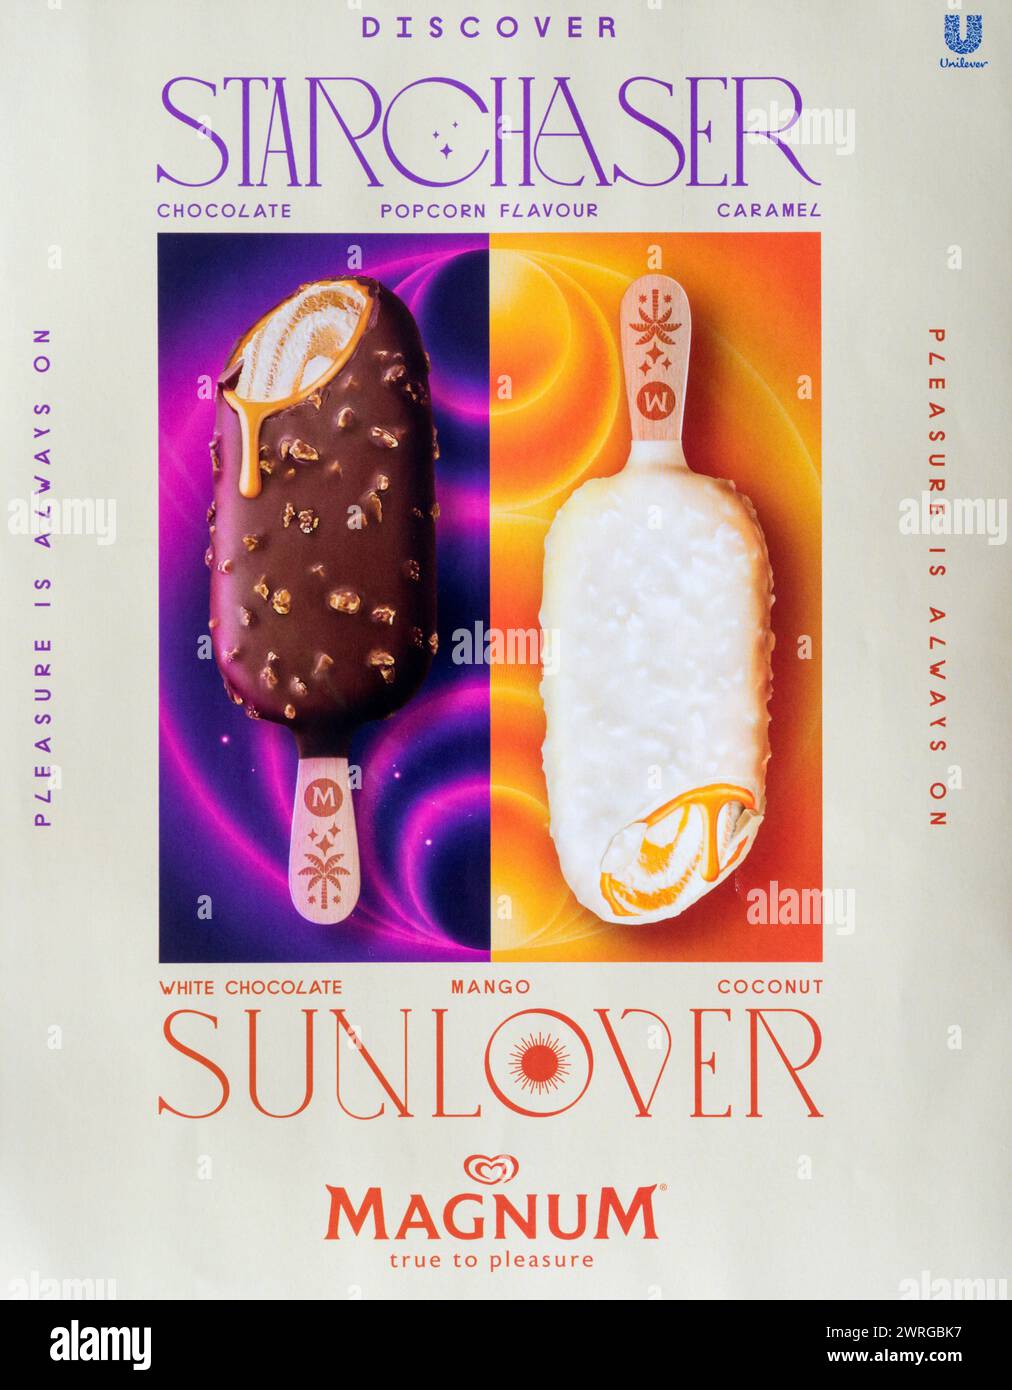 Advertisement for Starchaser and Sunlover Magnum ice creams.  Sainsbury's Magazine. July 2023. Stock Photo